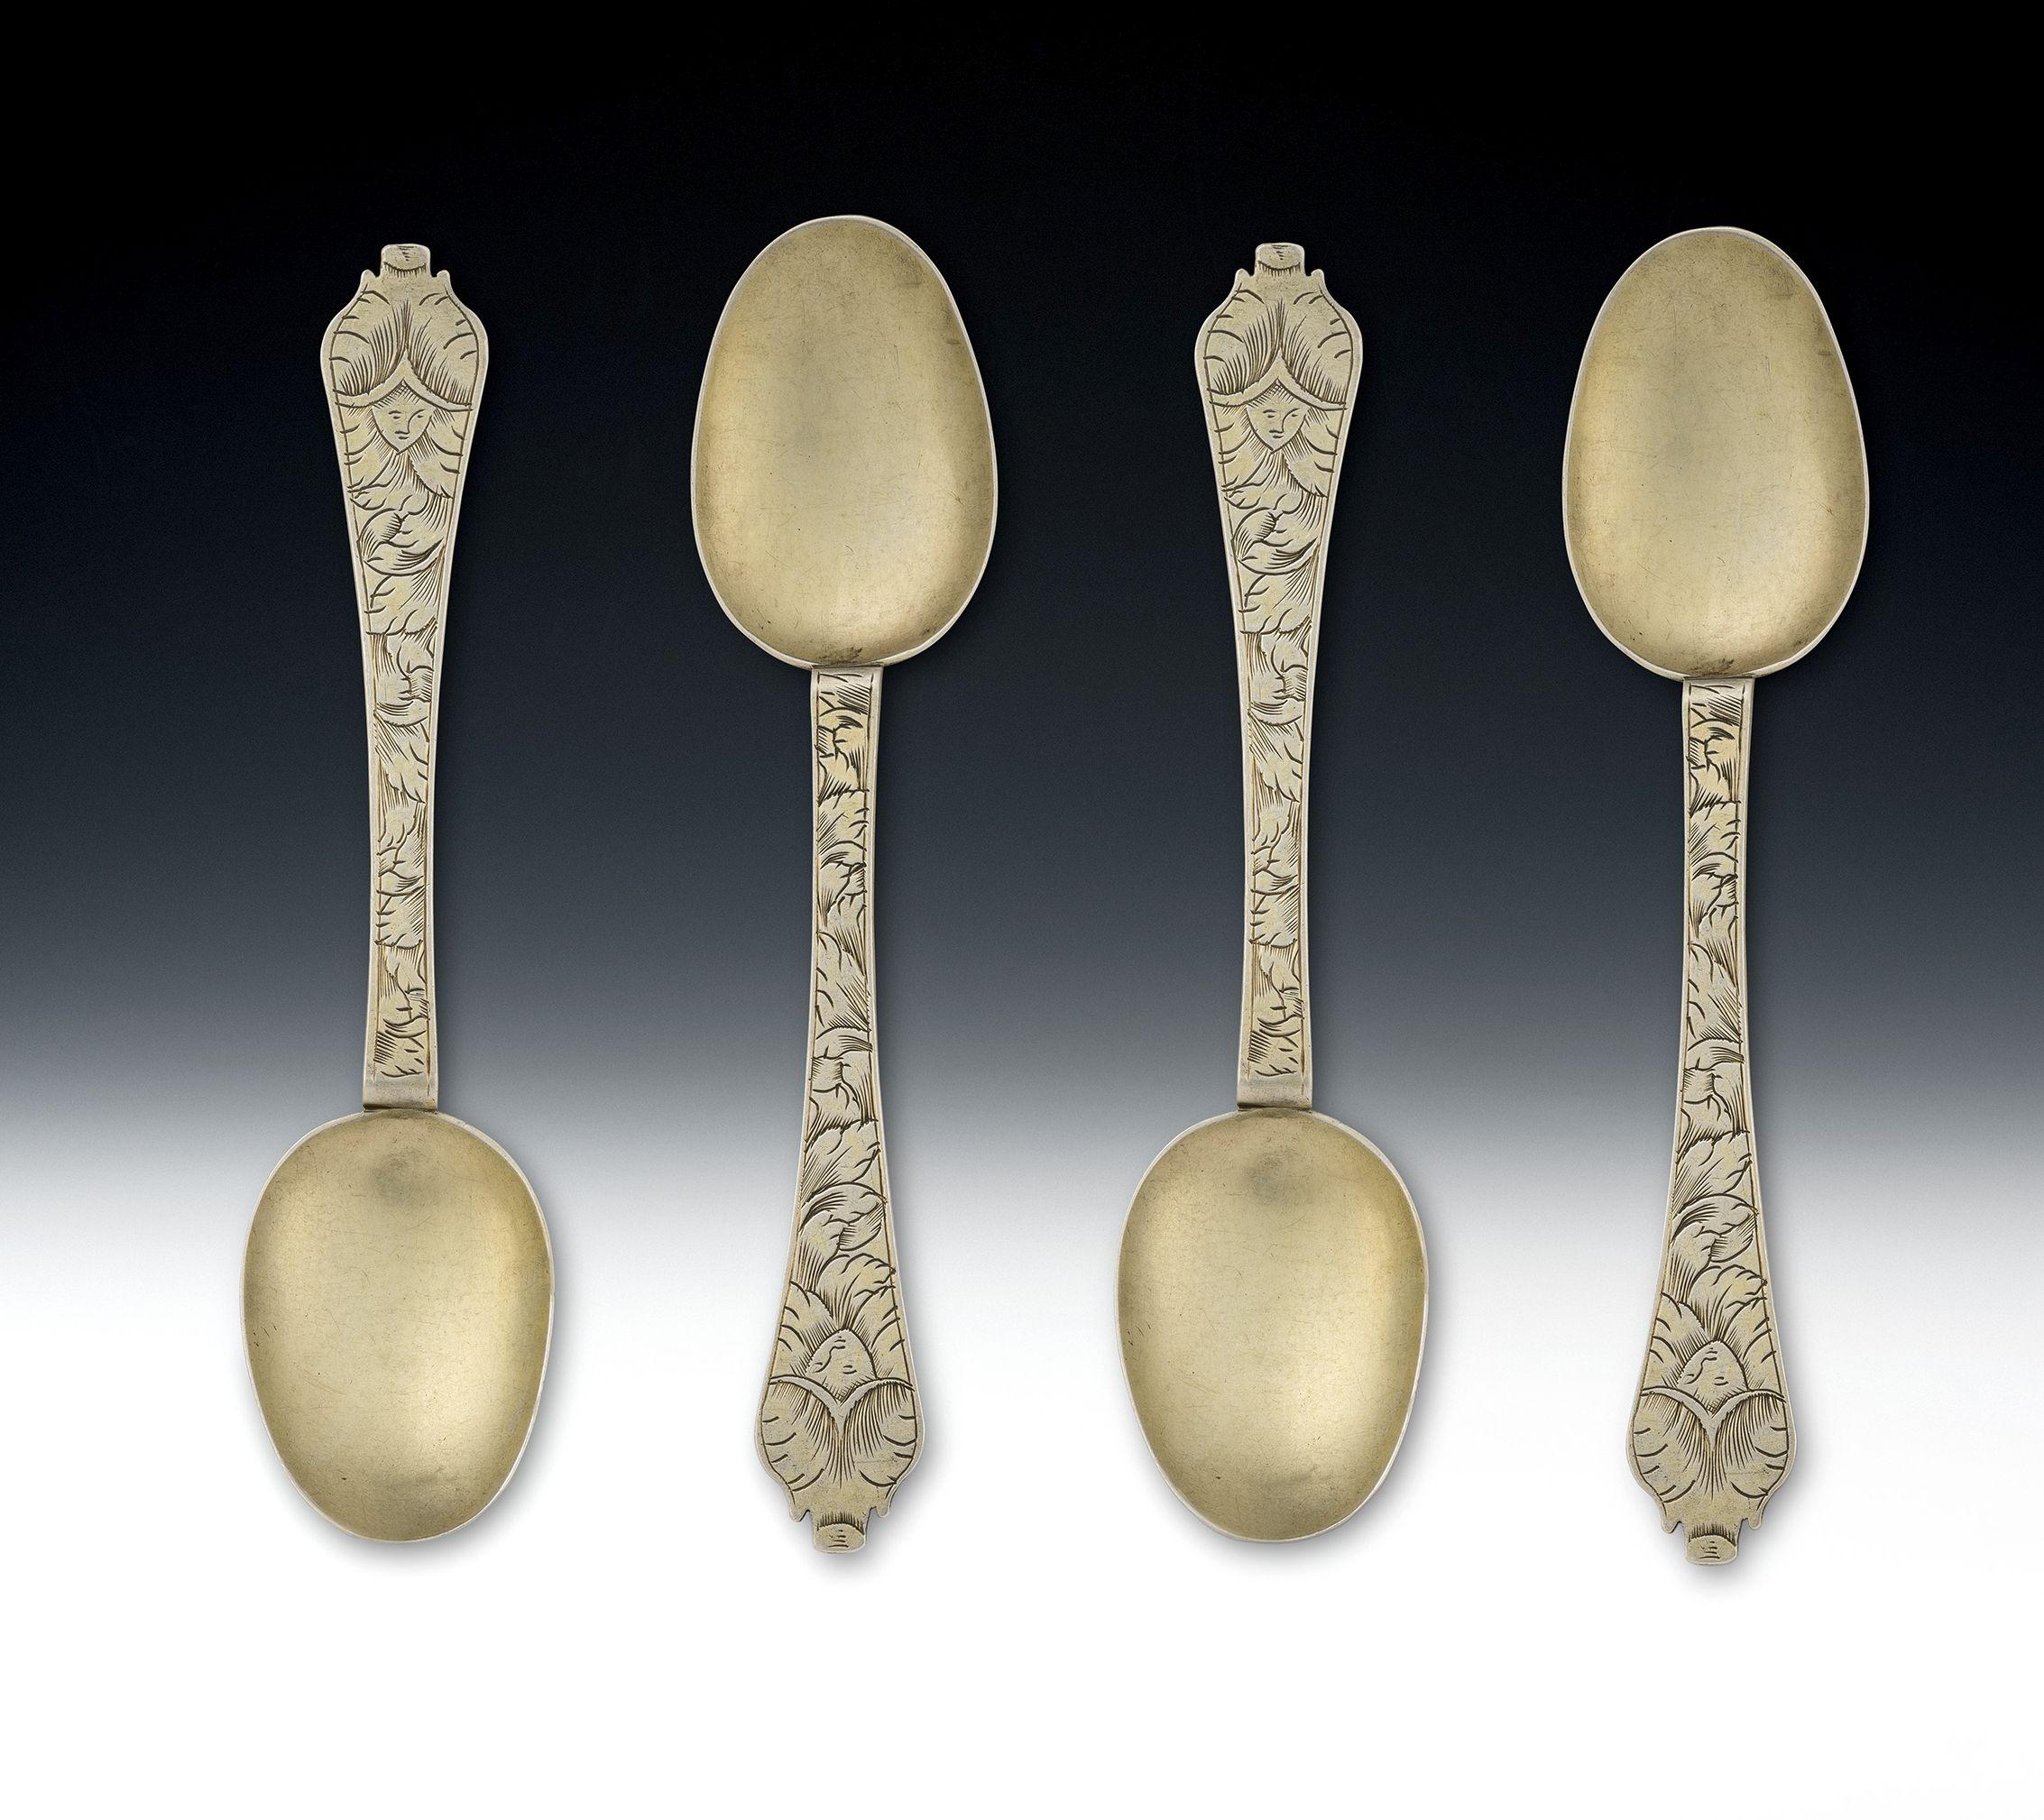 This exceptionally rare set of William & Mary silver gilt Trefid Teaspoons were made in London circa 1690 and are stamped with the maker's mark of AH with a crown above and a cinquefoil below. As you will appreciate, it is very rare to find a set of